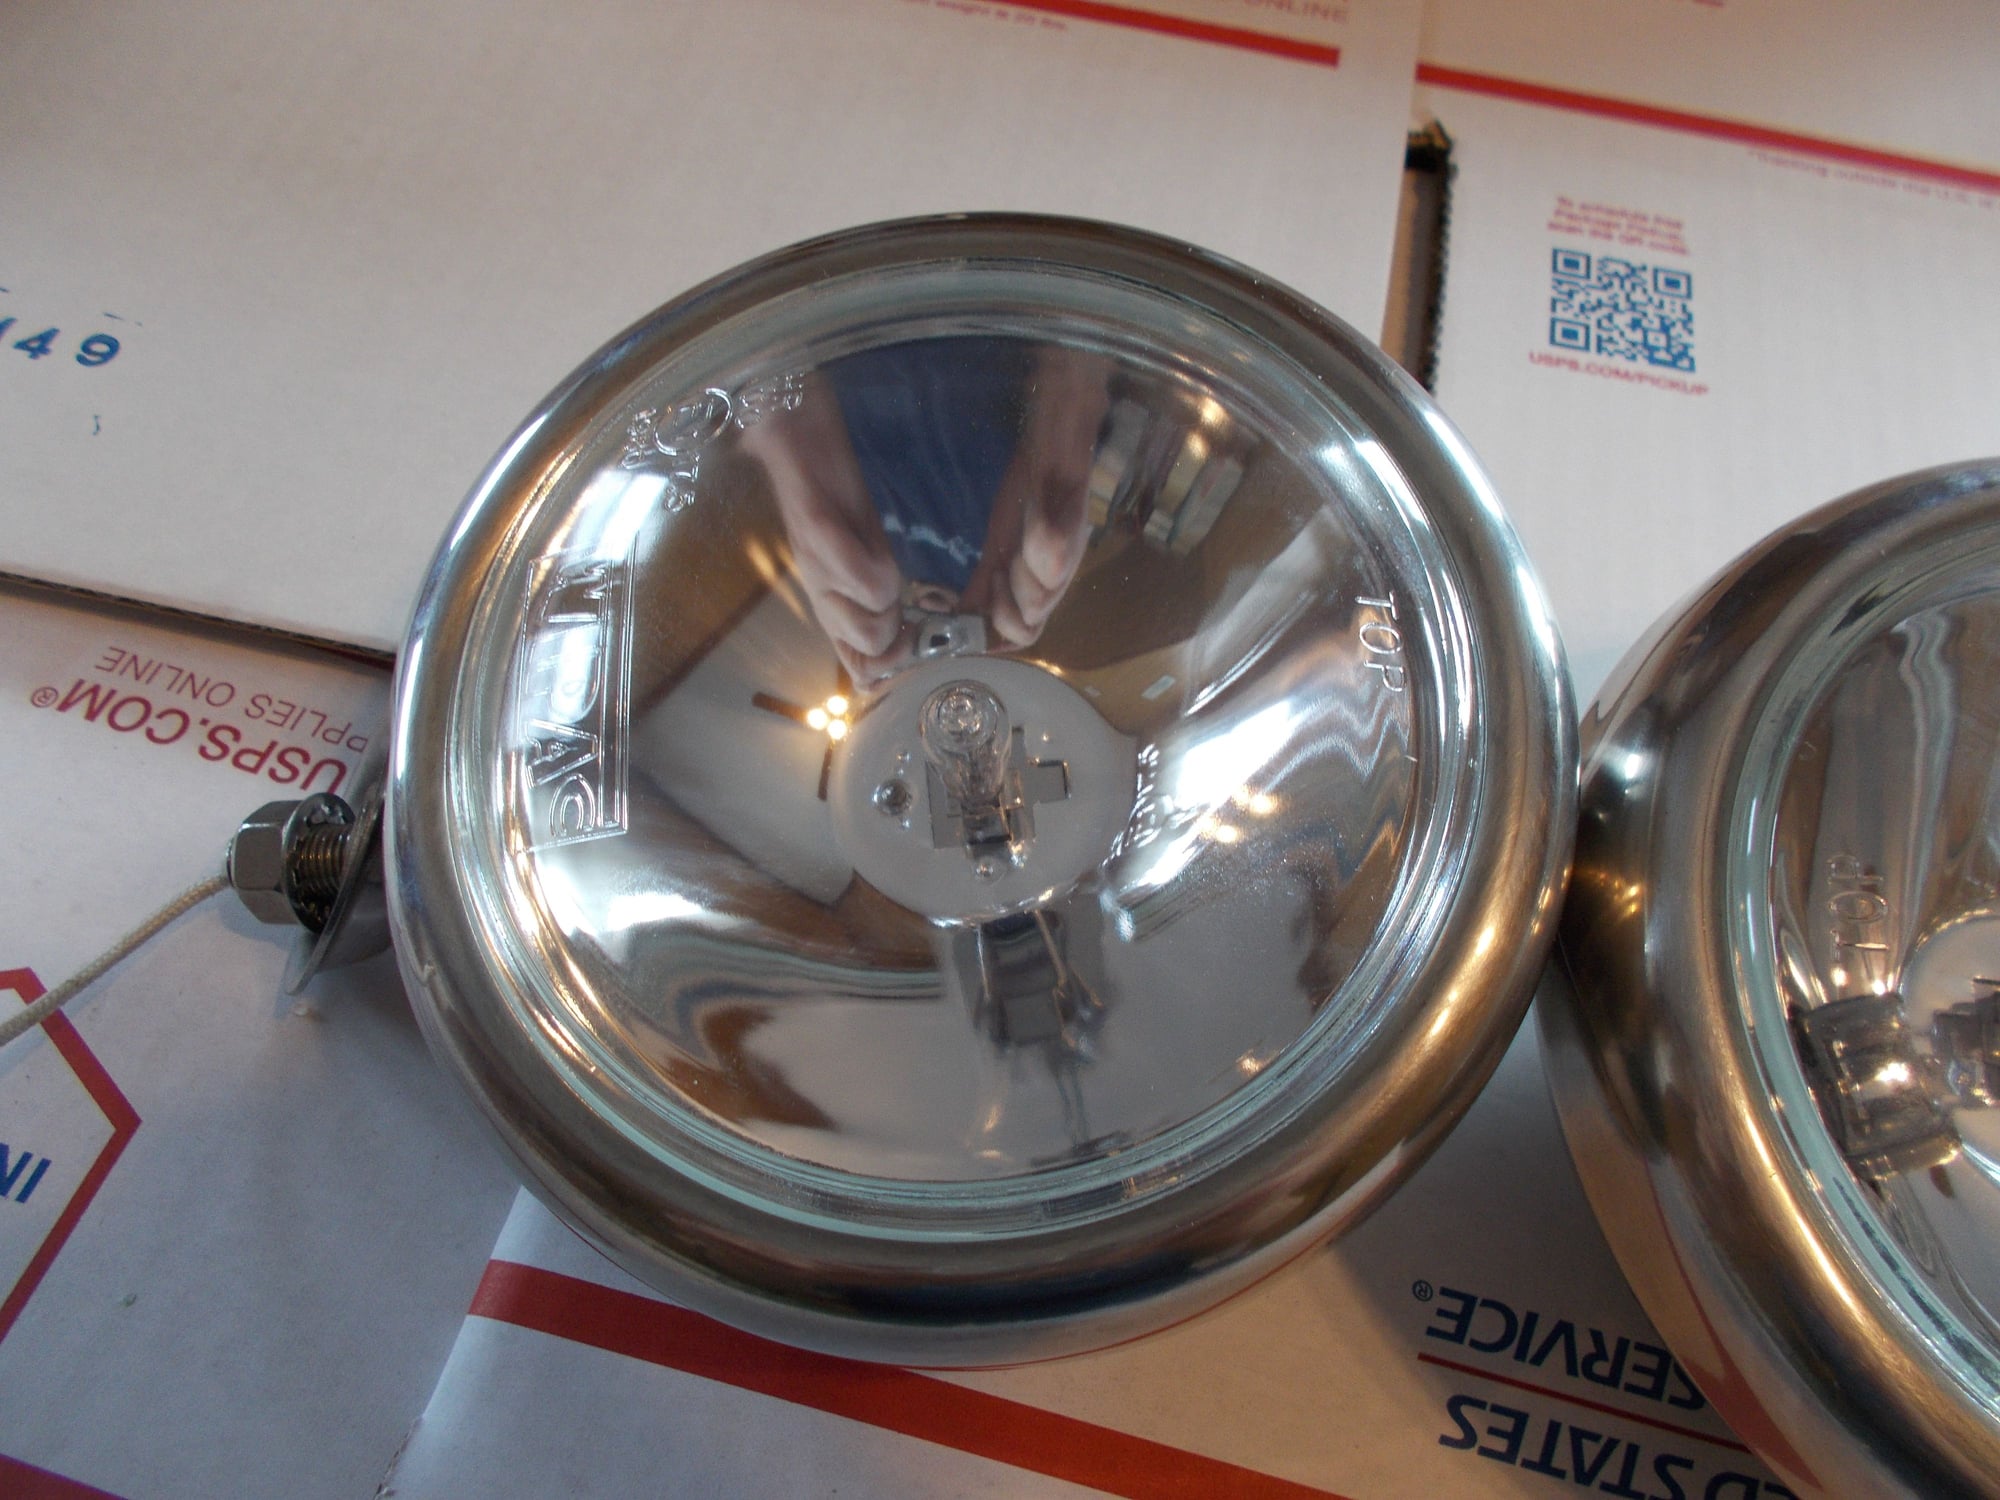 SINGLE BMW MINI SPOT LIGHT DRIVING LAMP STAINLESS STEEL NEW WIPAC S6066 